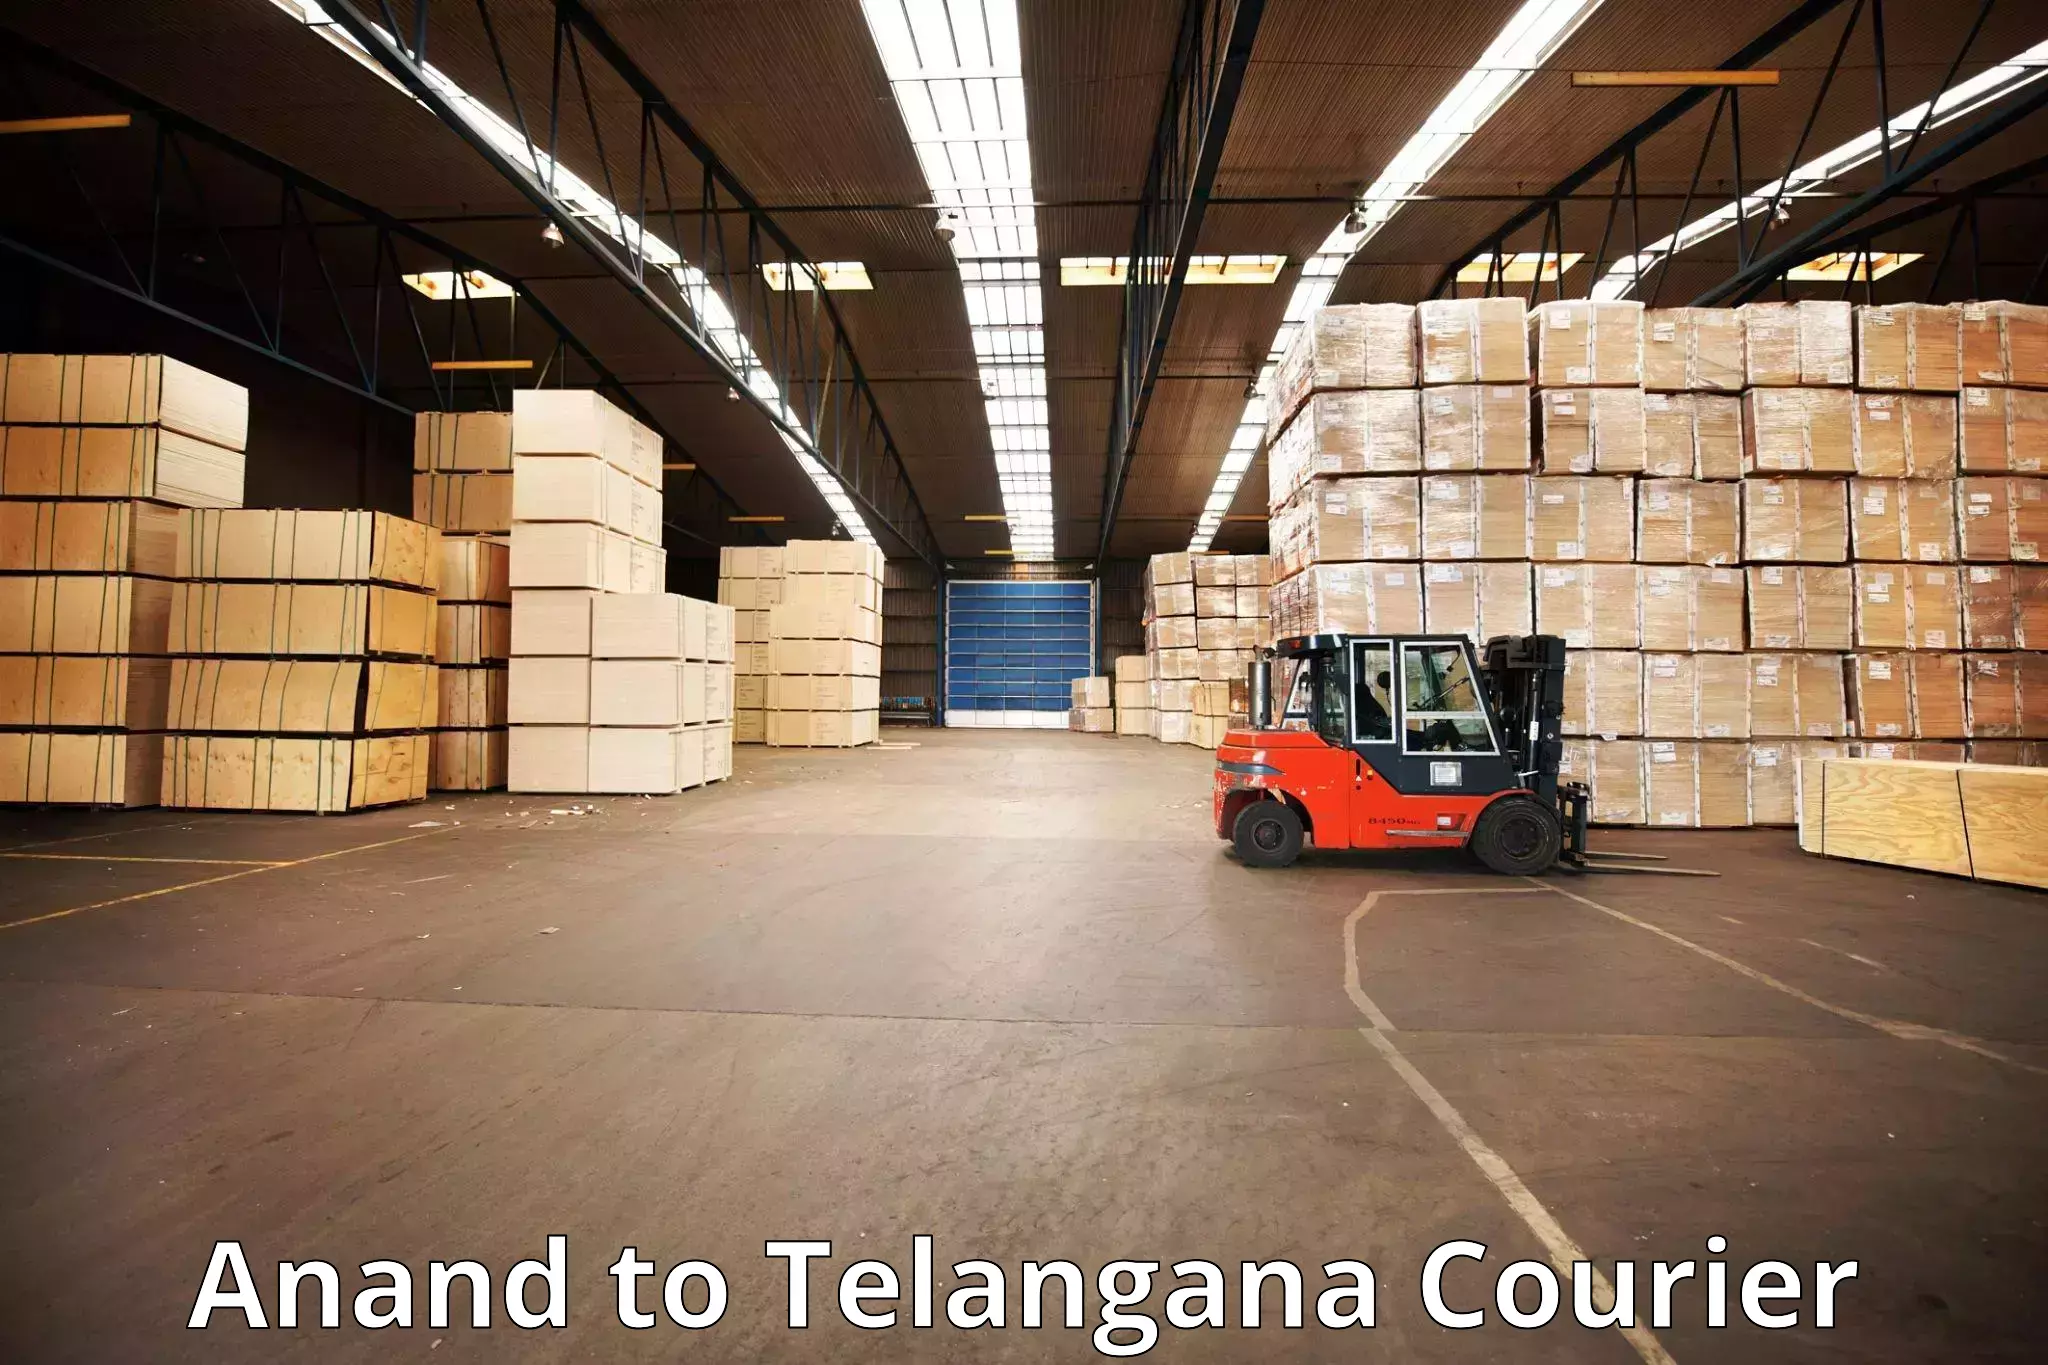 Luggage shipment specialists Anand to Tadoor